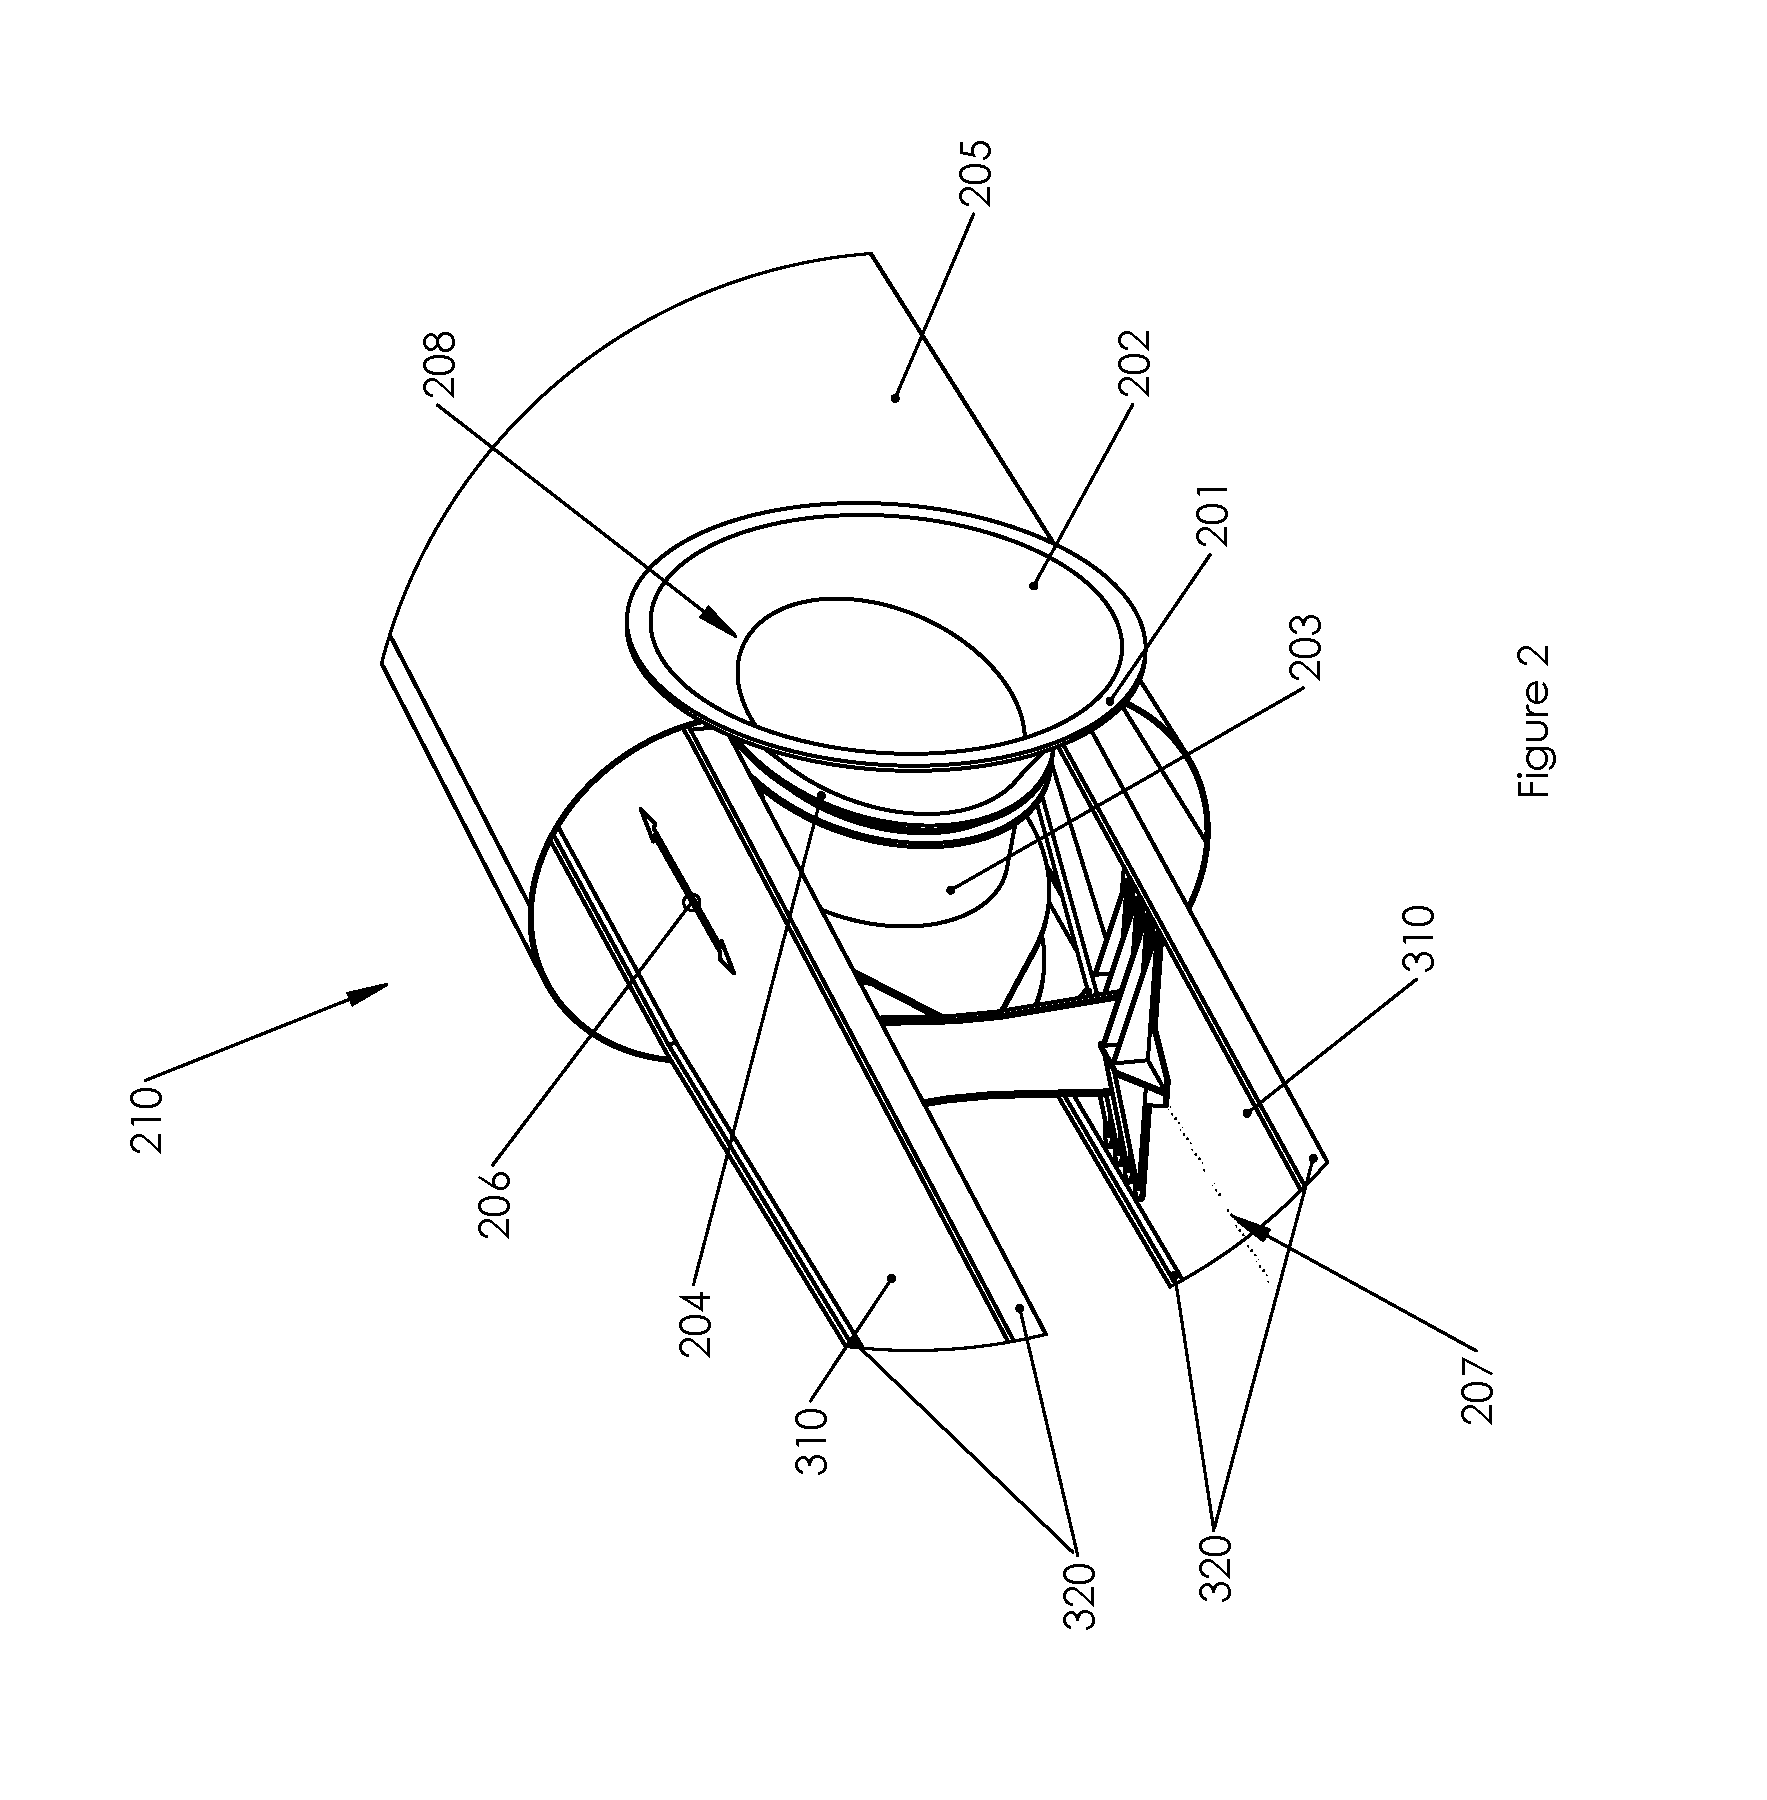 Strain isolated attachment for one-piece wind turbine rotor hub